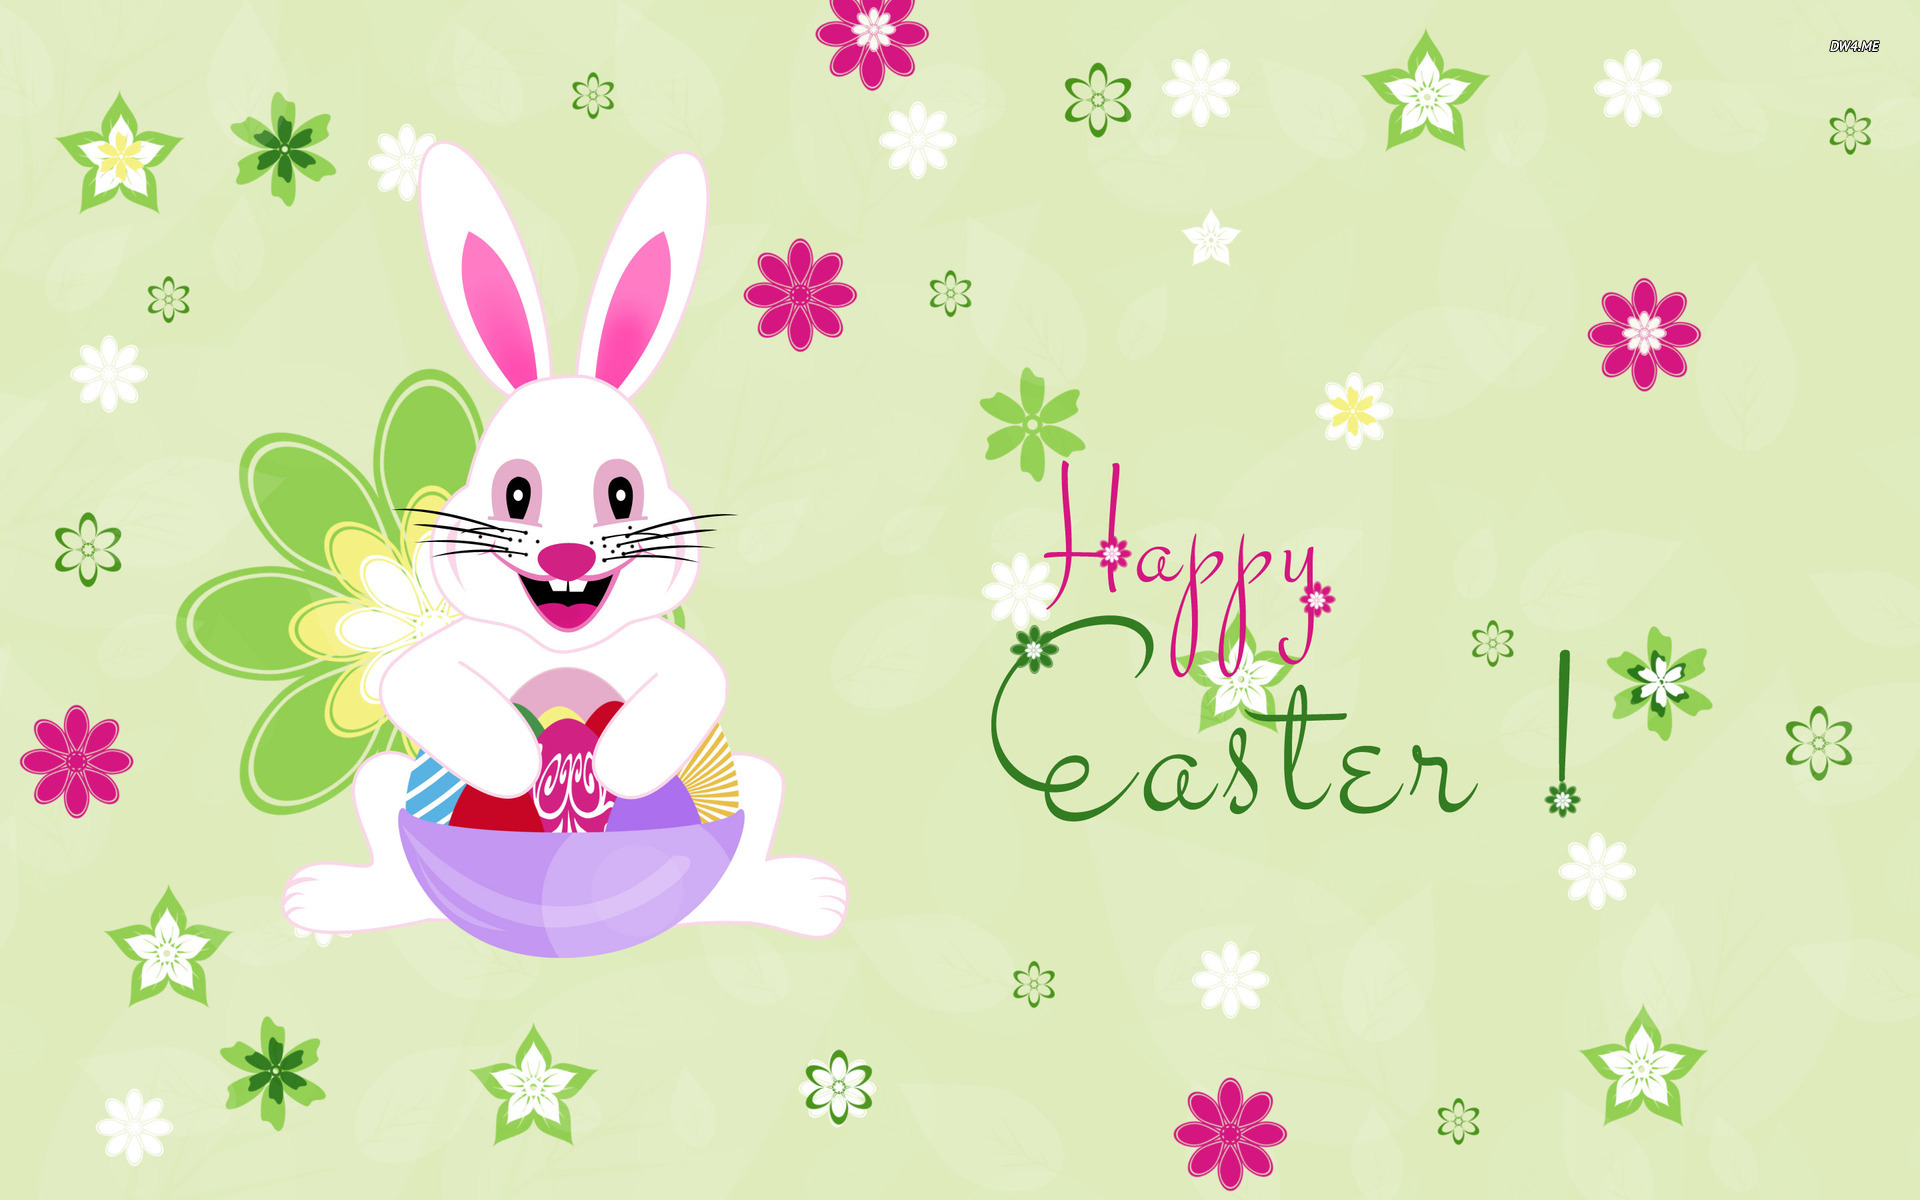 Happy Easter wallpaper   Holiday wallpapers   1257